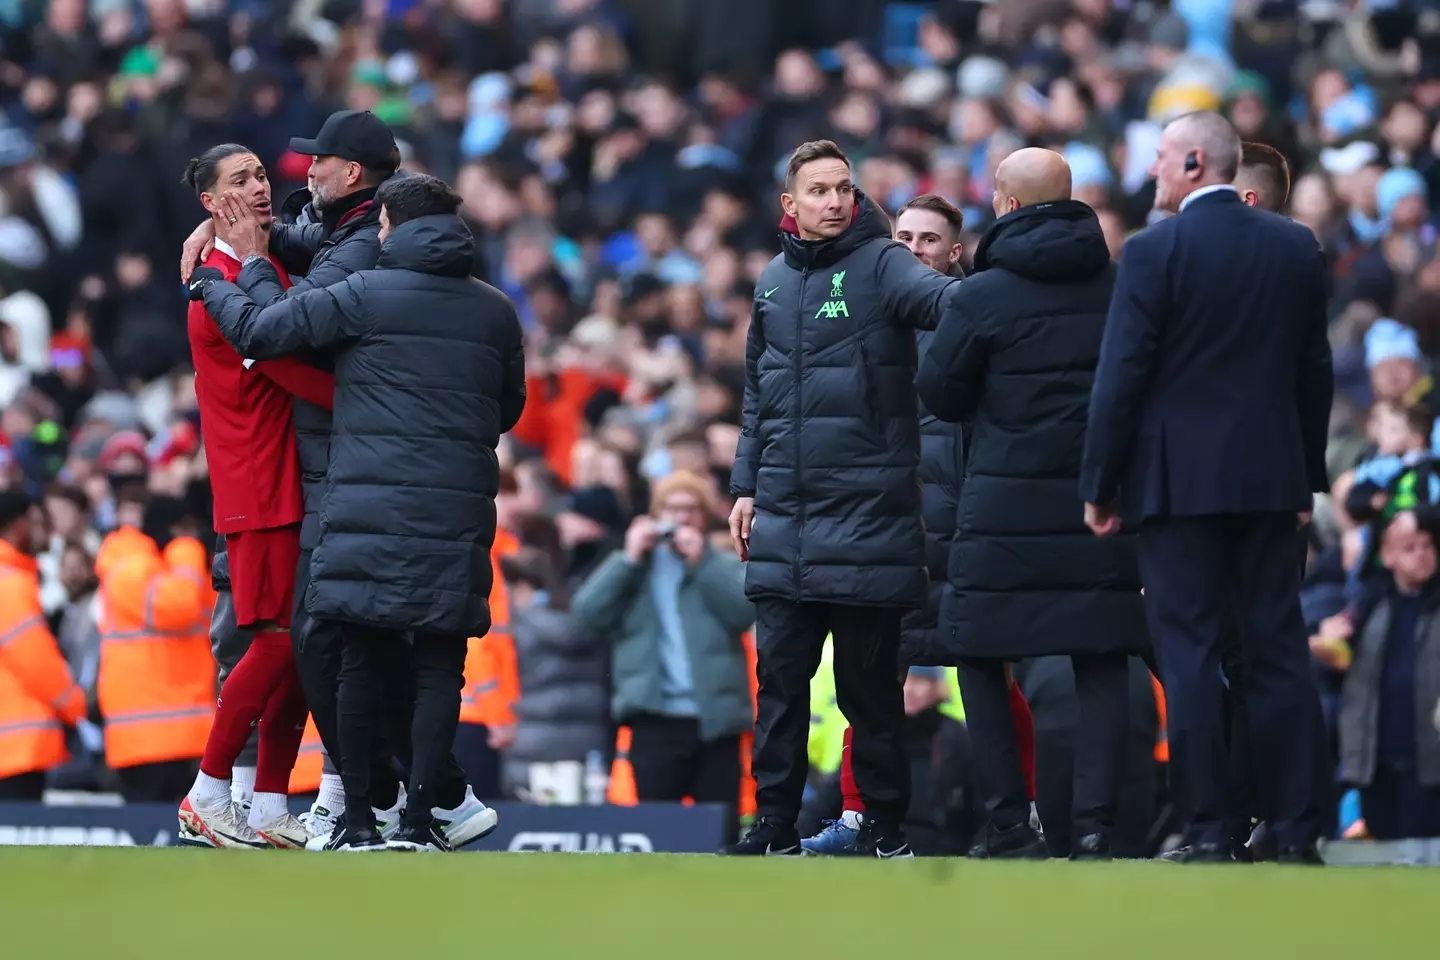 Nunez had to be held back by Liverpool staff. (Image